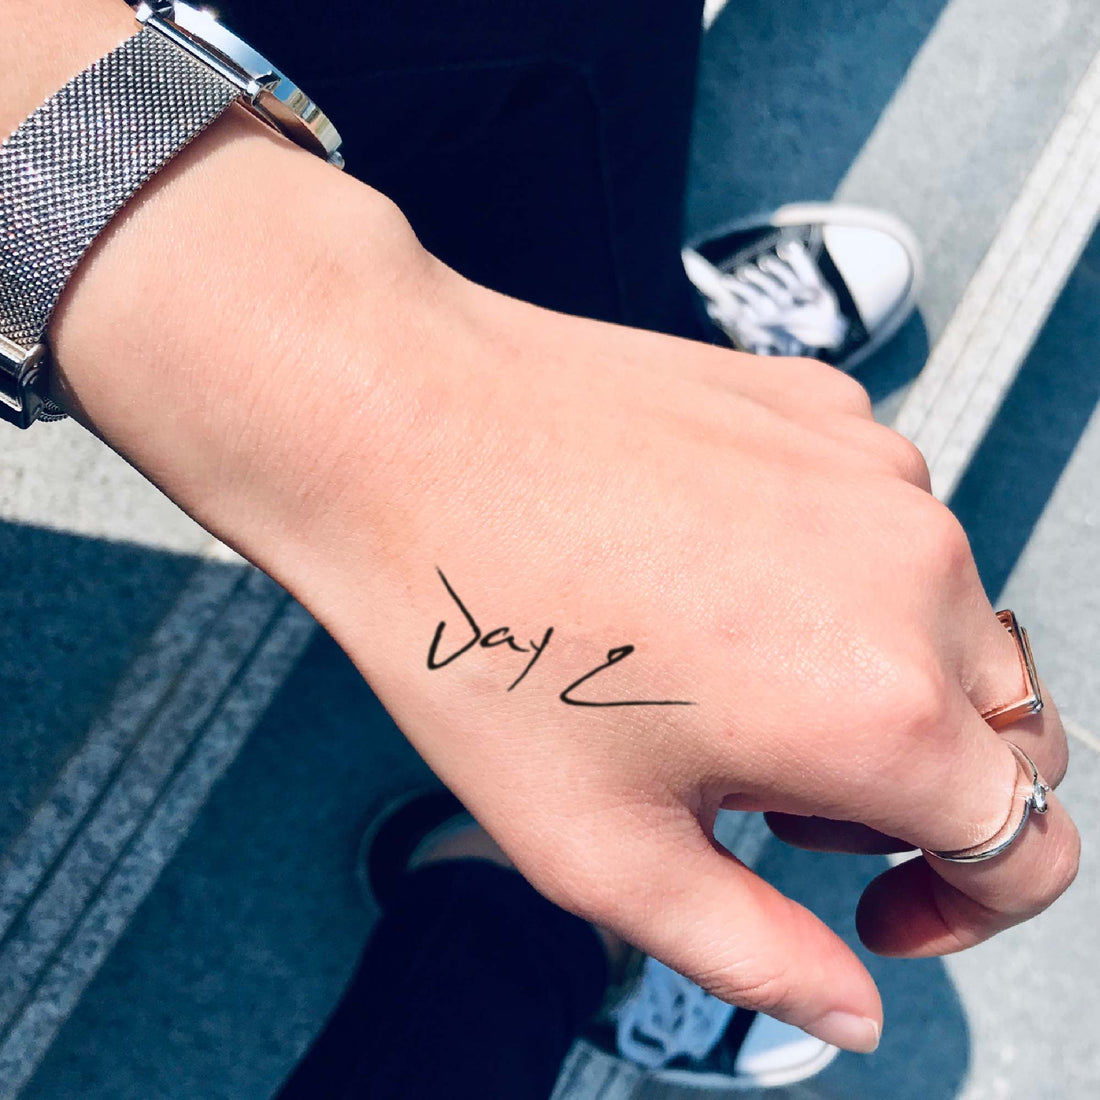 Jay Z custom temporary tattoo sticker design idea inspiration meanings removal arm wrist hand words font name signature calligraphy lyrics tour concert outfits merch accessory gift souvenir costumes wear dress up code